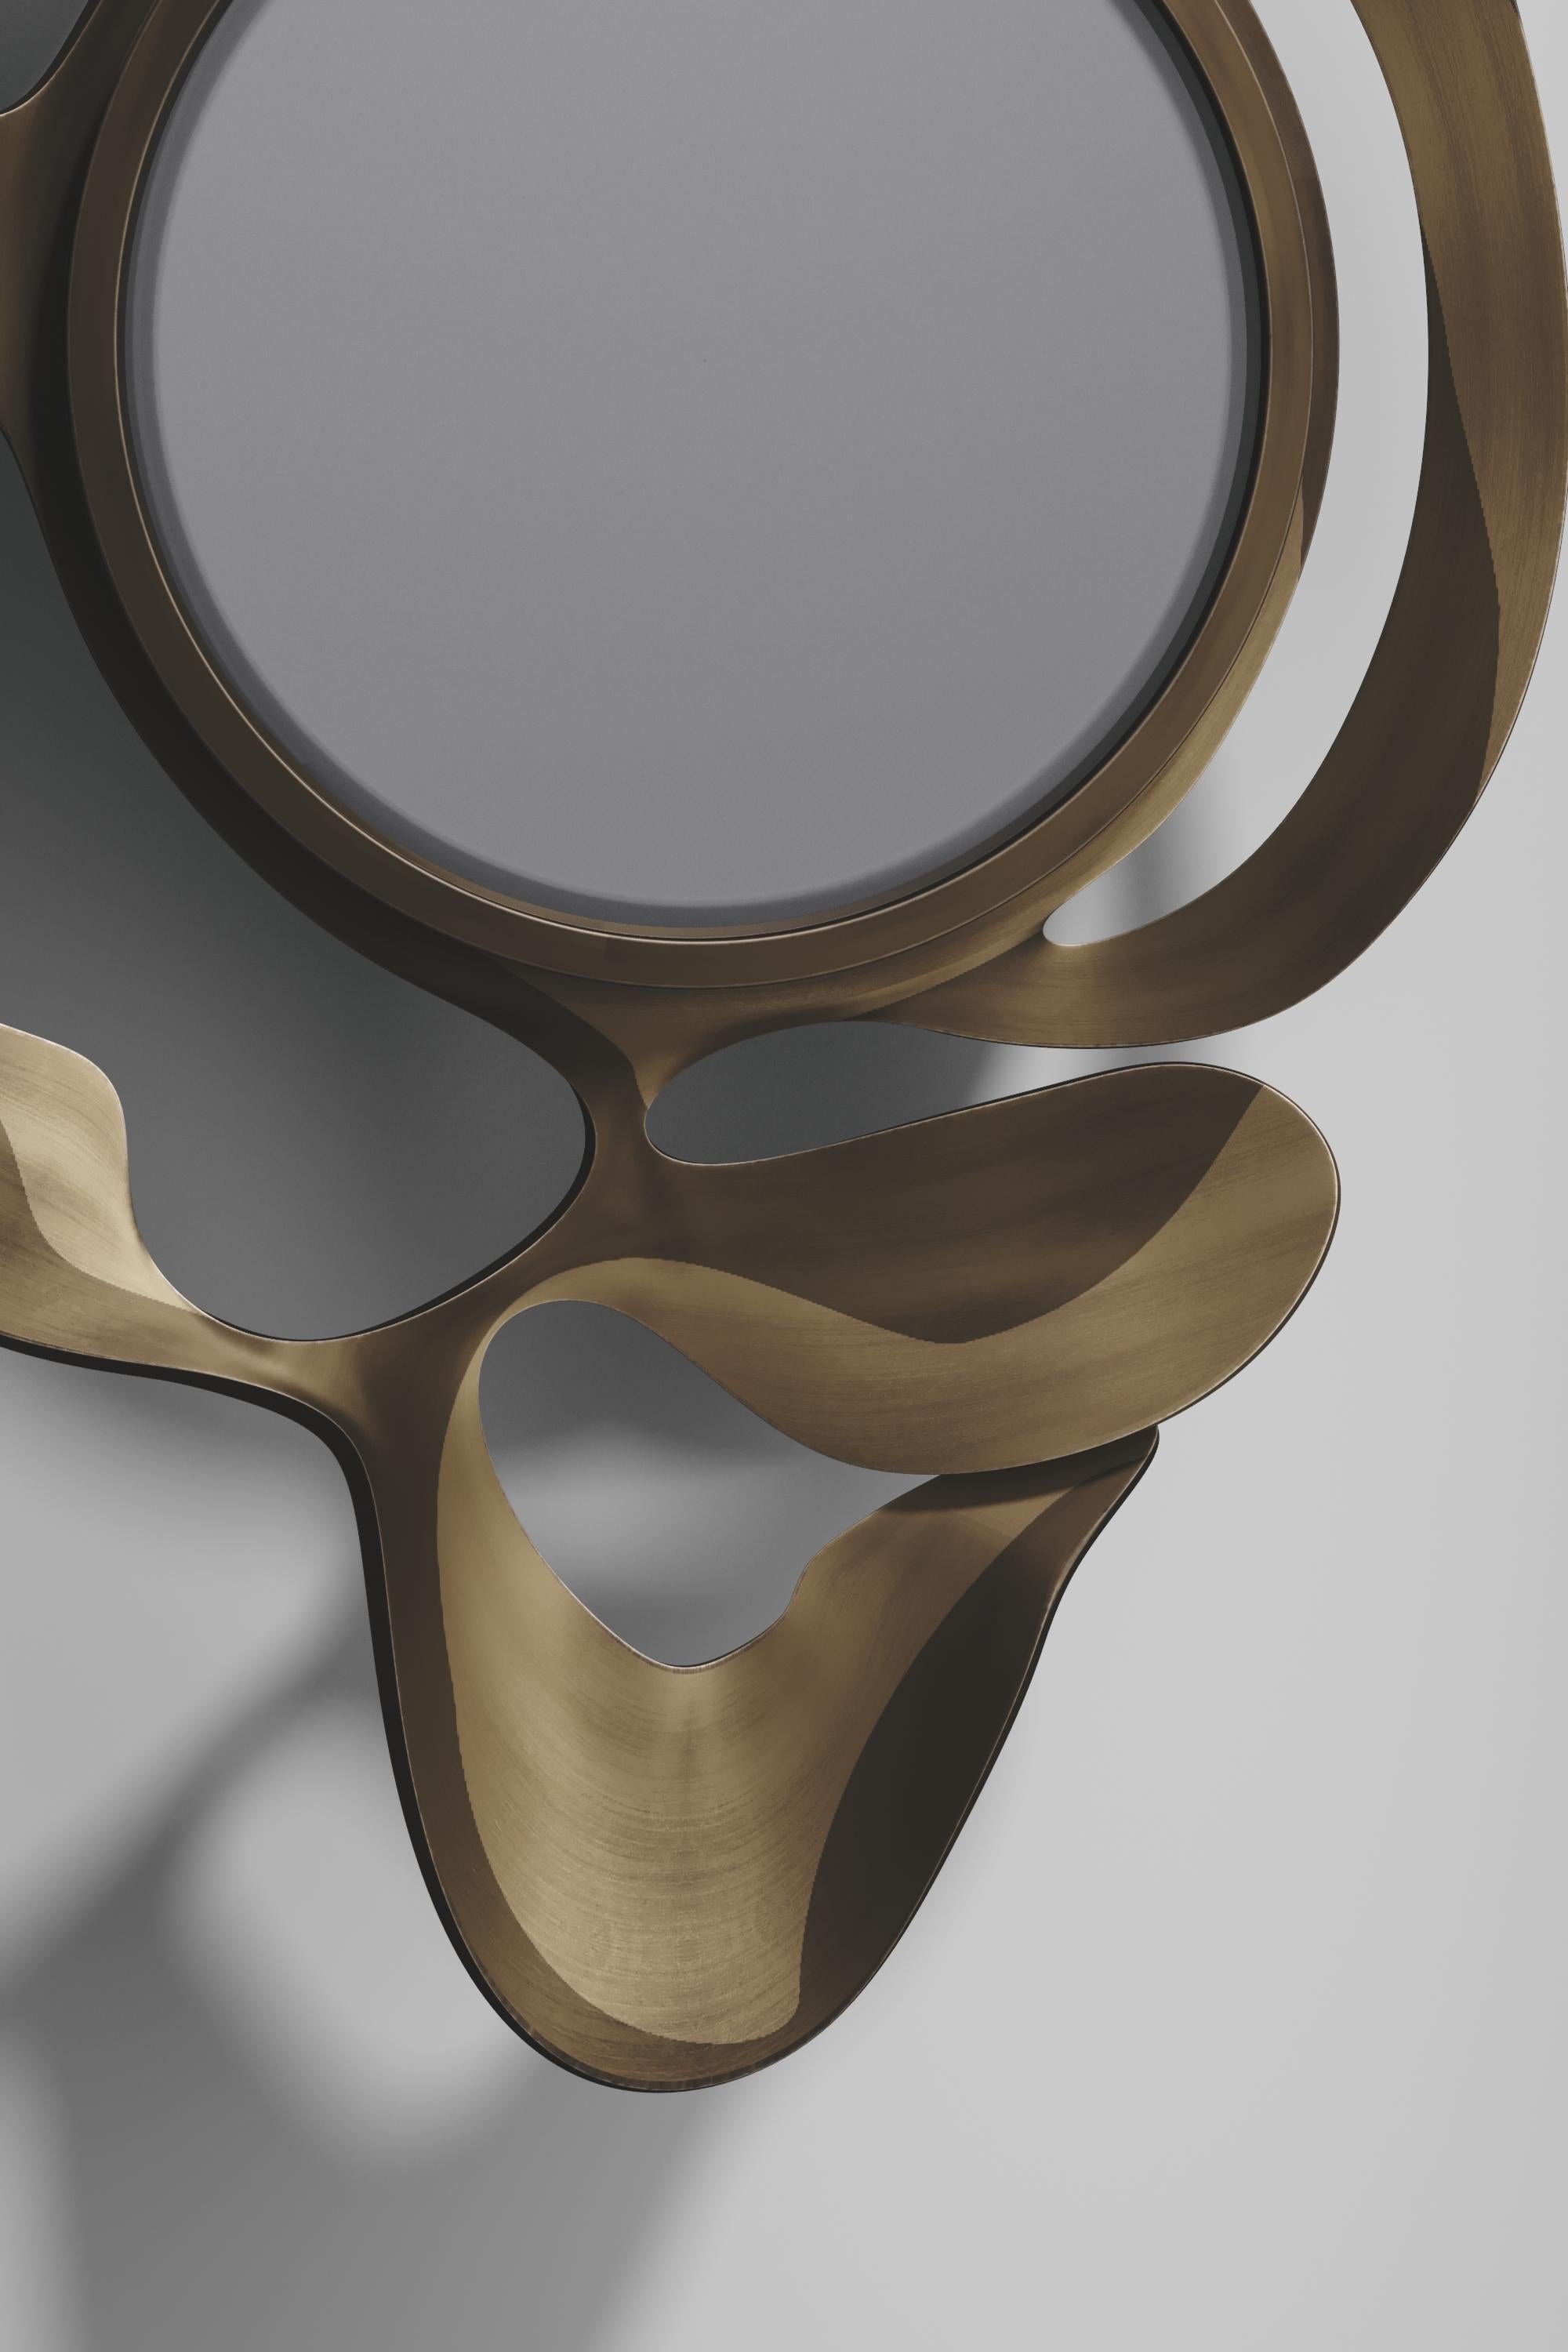 The Leaf Mirror by Kifu Paris is a dramatic and organic piece. The two tone bronze-patina bass inlay mixture creates a striking appearance as it emulates a whimsical interpretation of intertwining branches. This piece is designed by Kifu Augousti